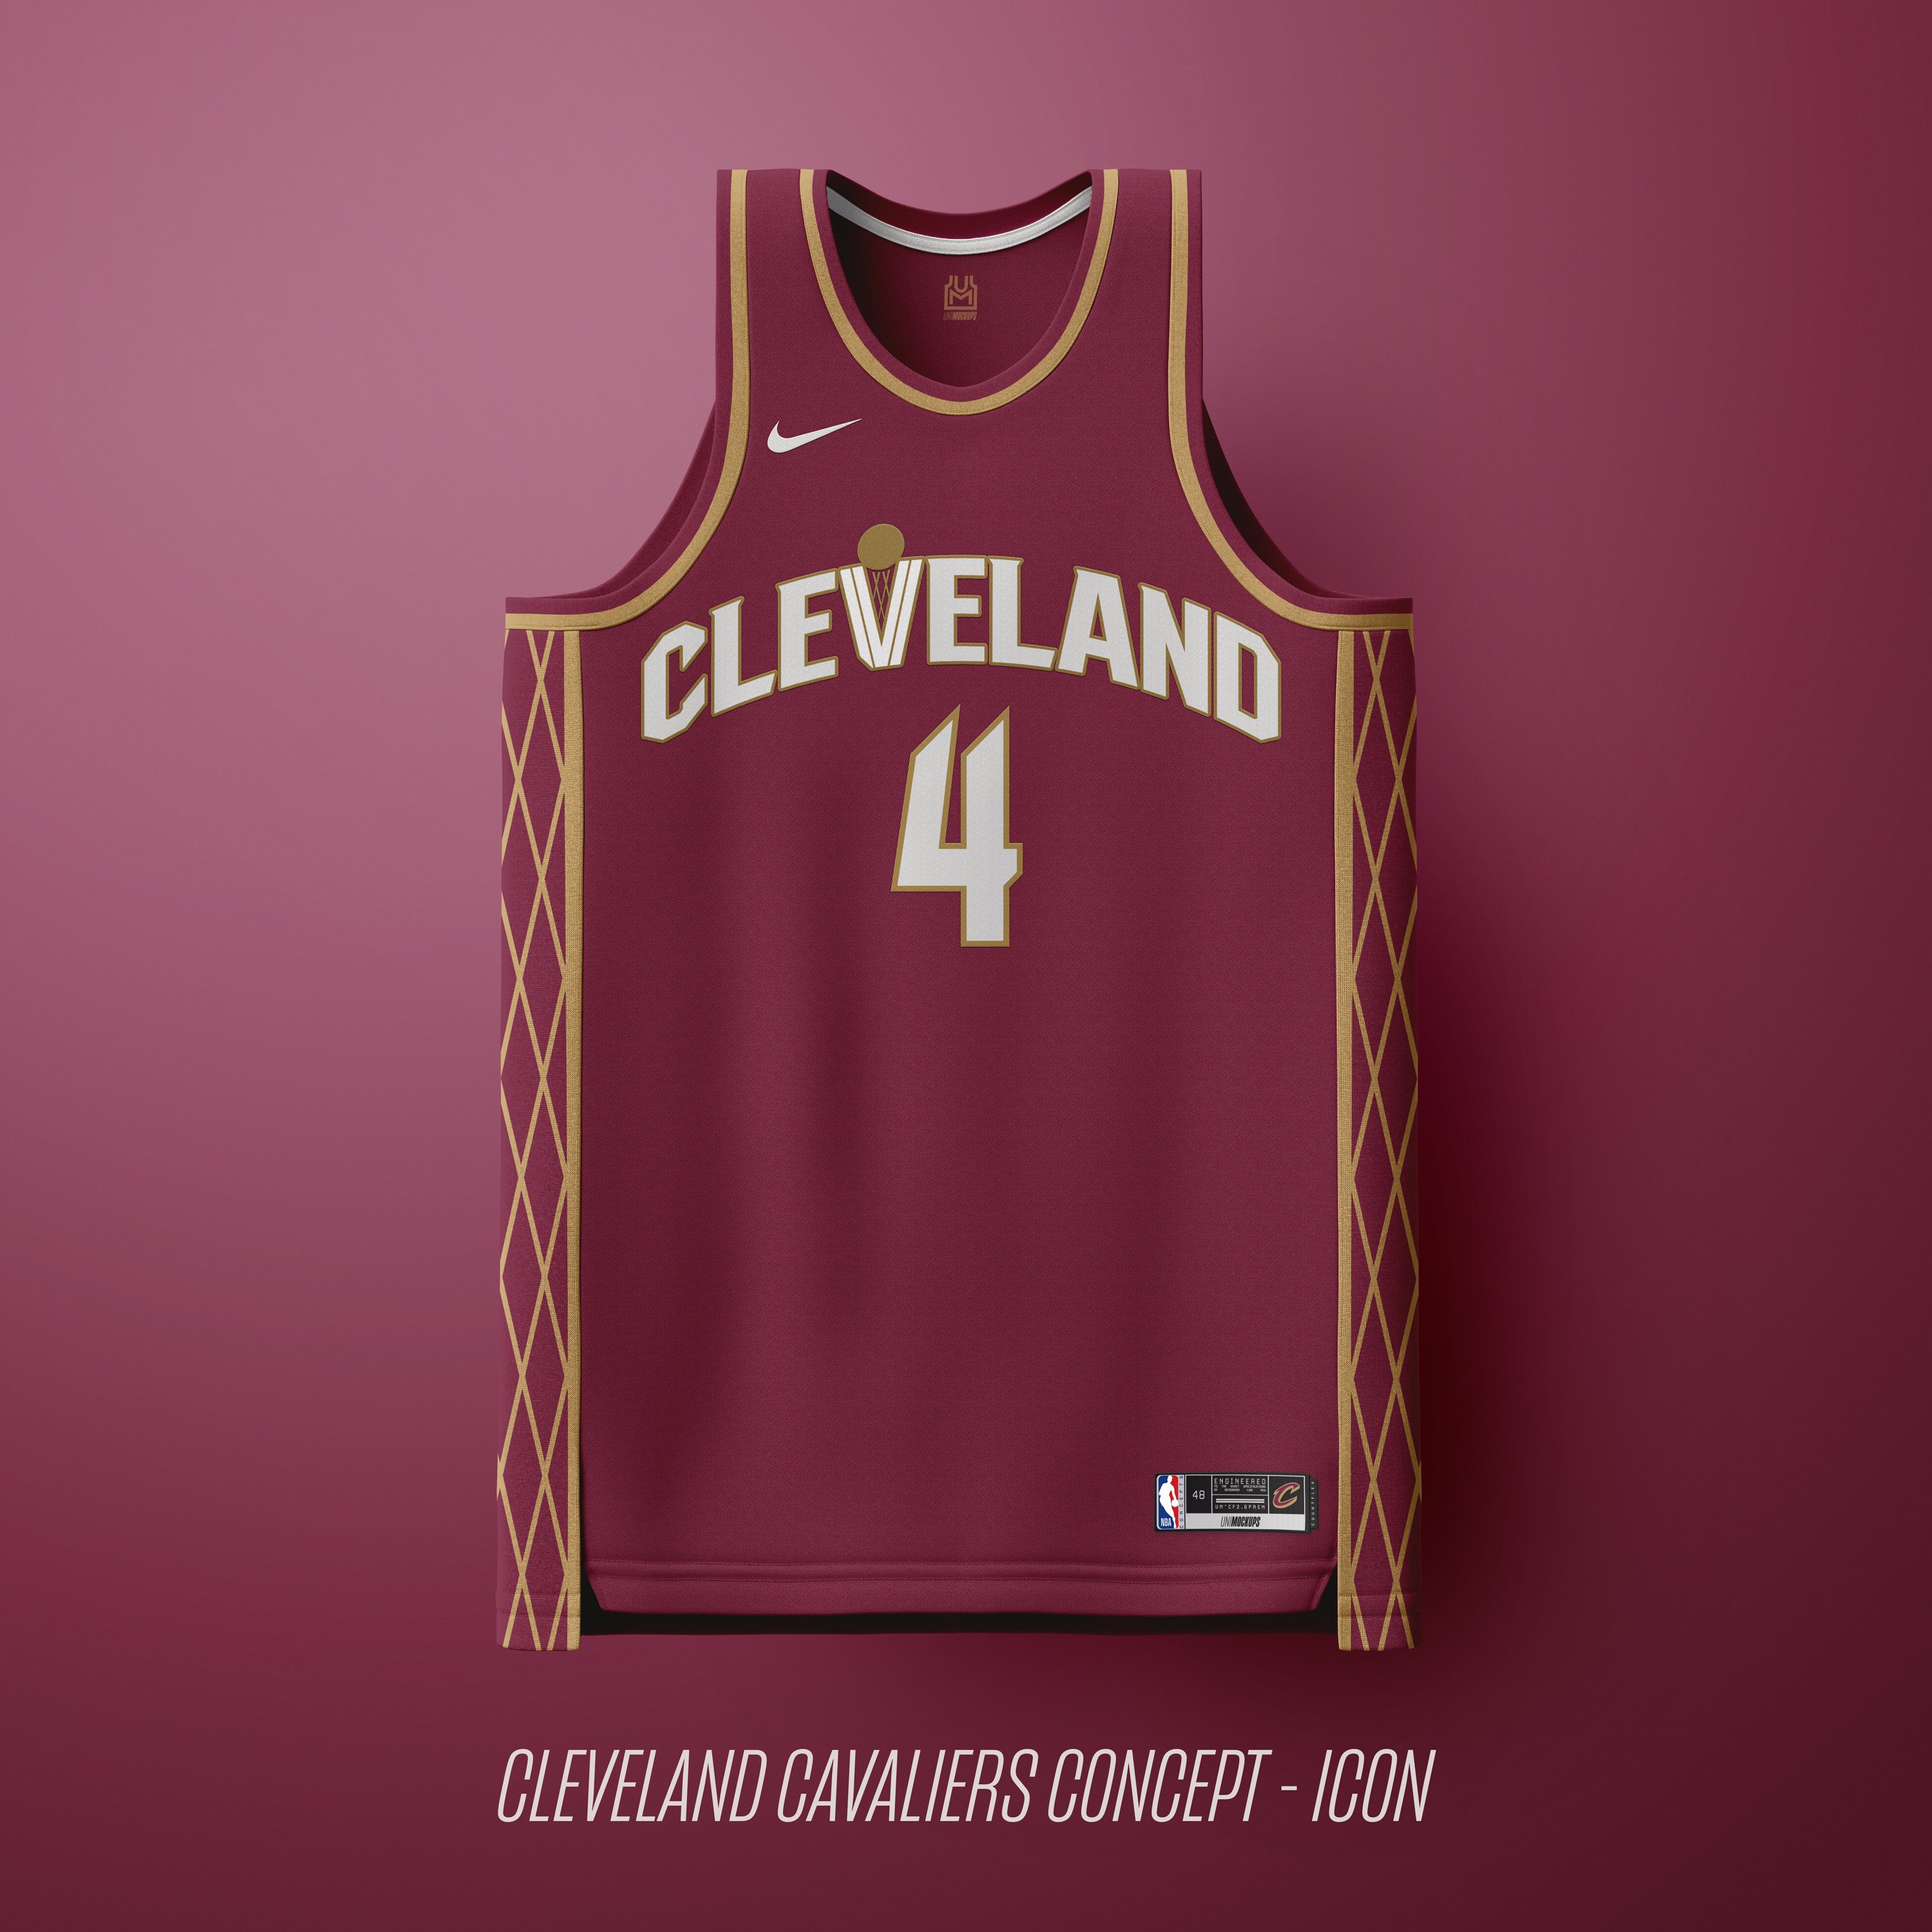 Look: Here's one potential design for the Cavaliers' new jerseys